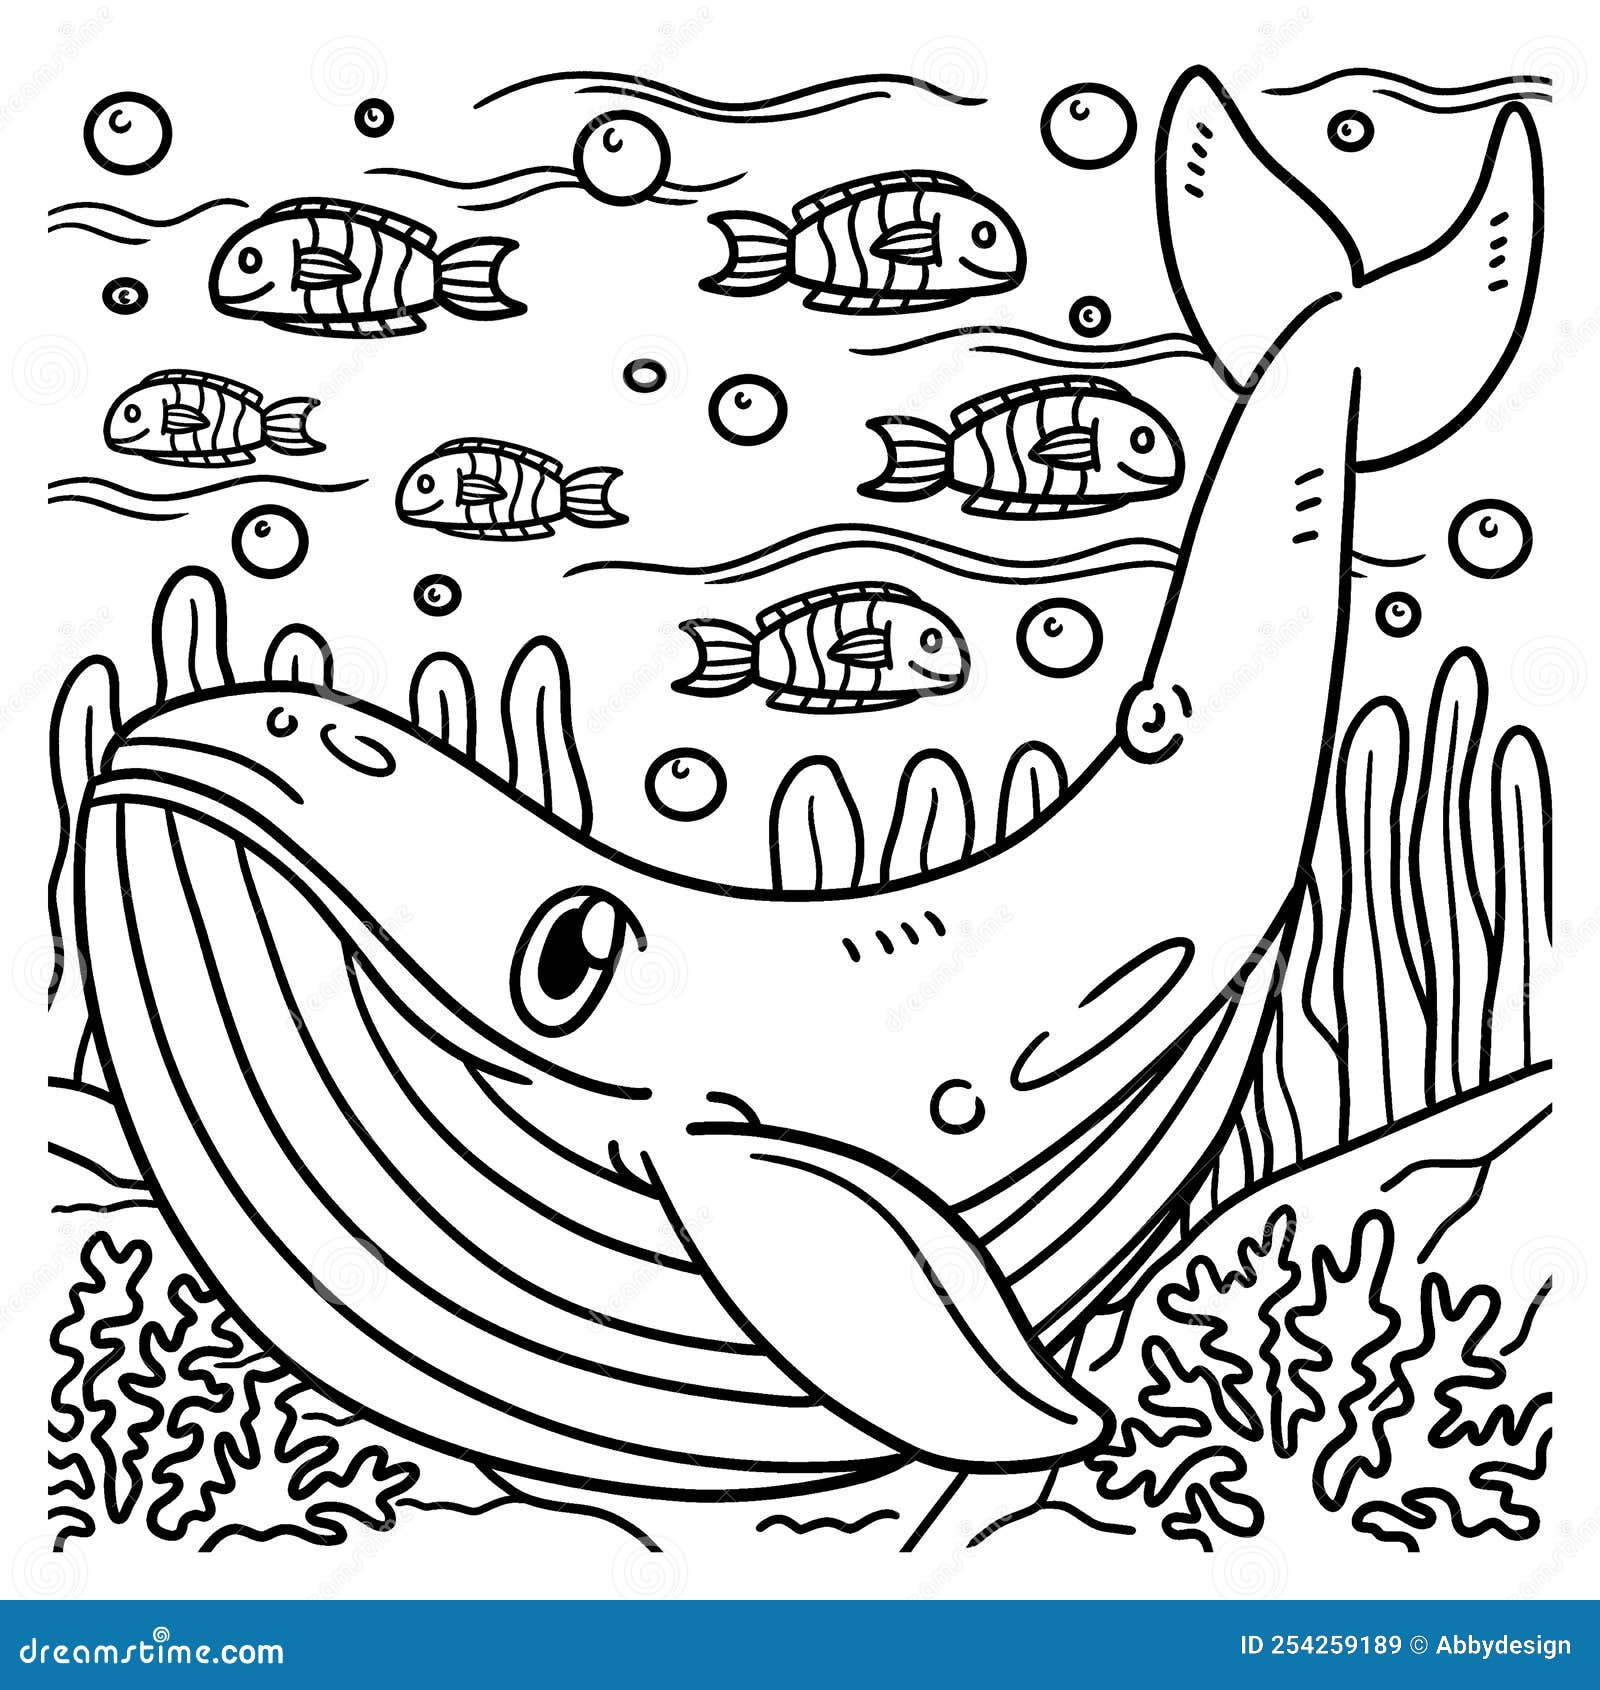 Blue whale coloring page for kids stock vector